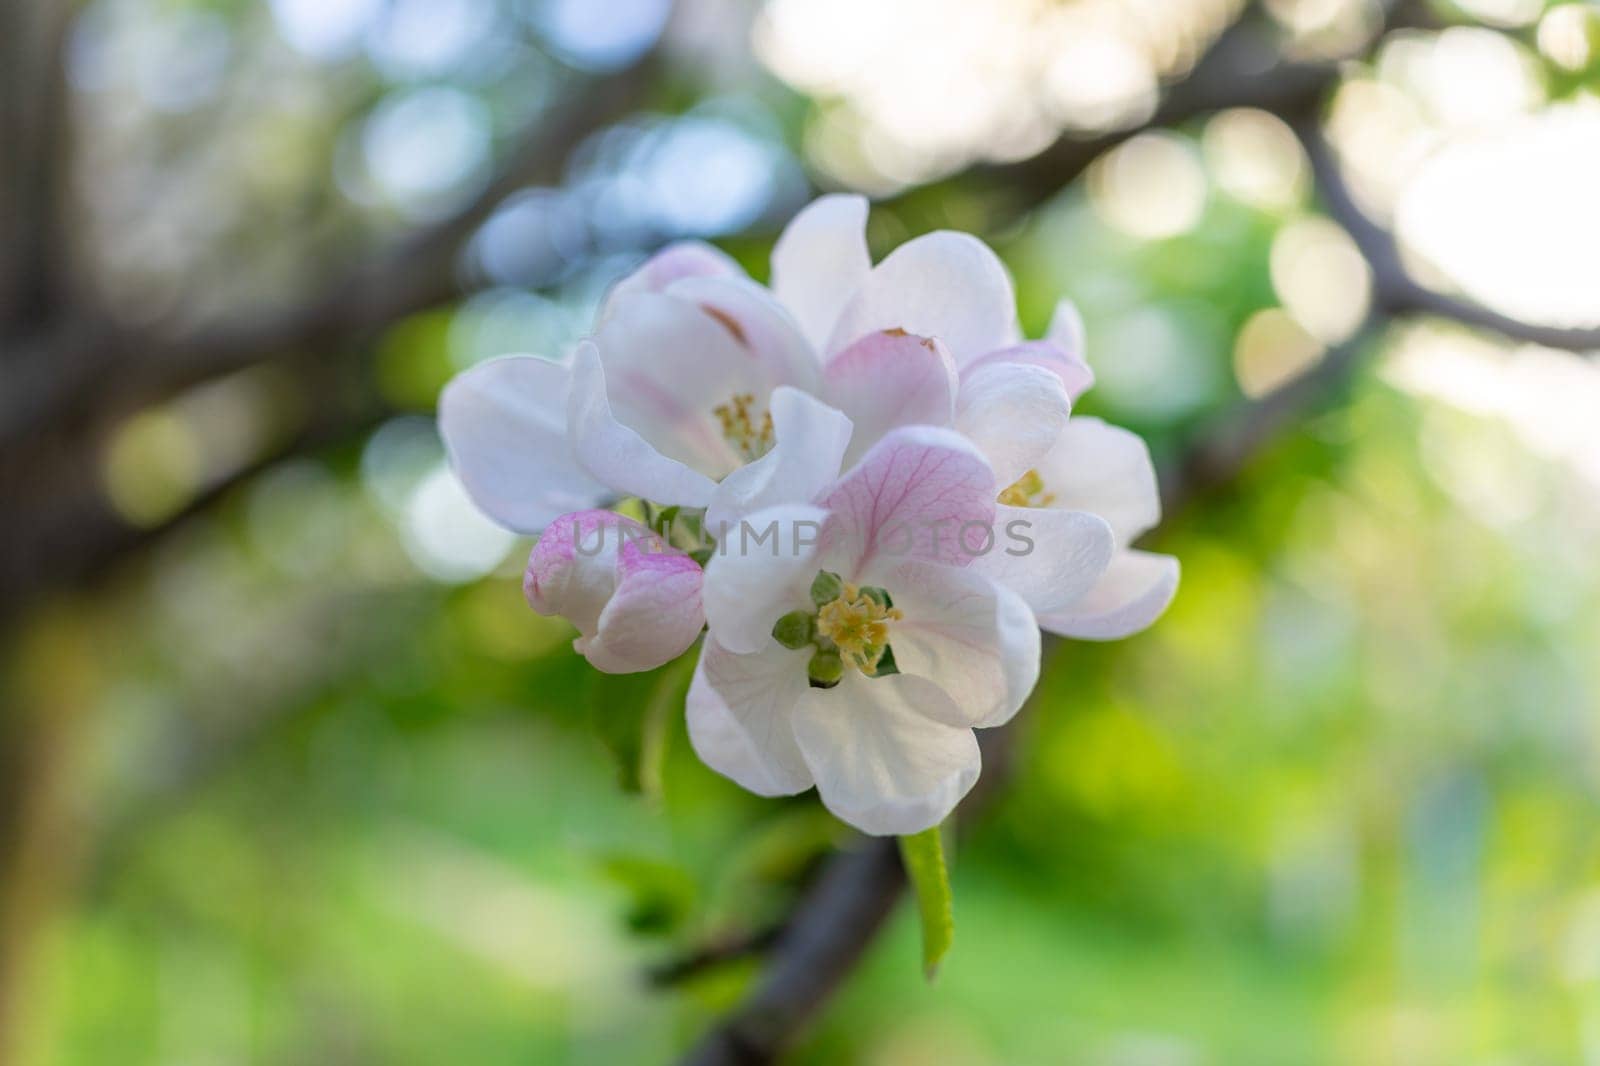 A beautiful inflorescence of apple flowers.